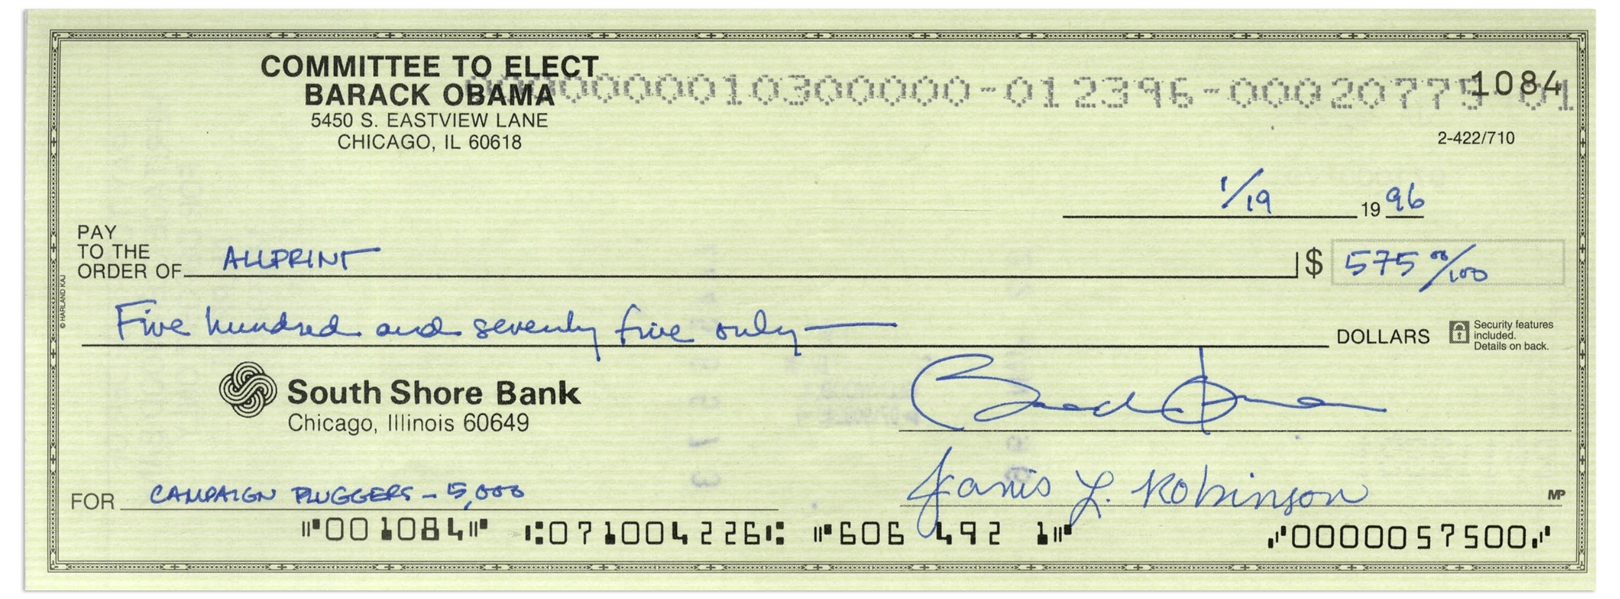 Scarce Check Handwritten and Signed by Barack Obama From the ''Committee to Elect Barack Obama'' Bank Account